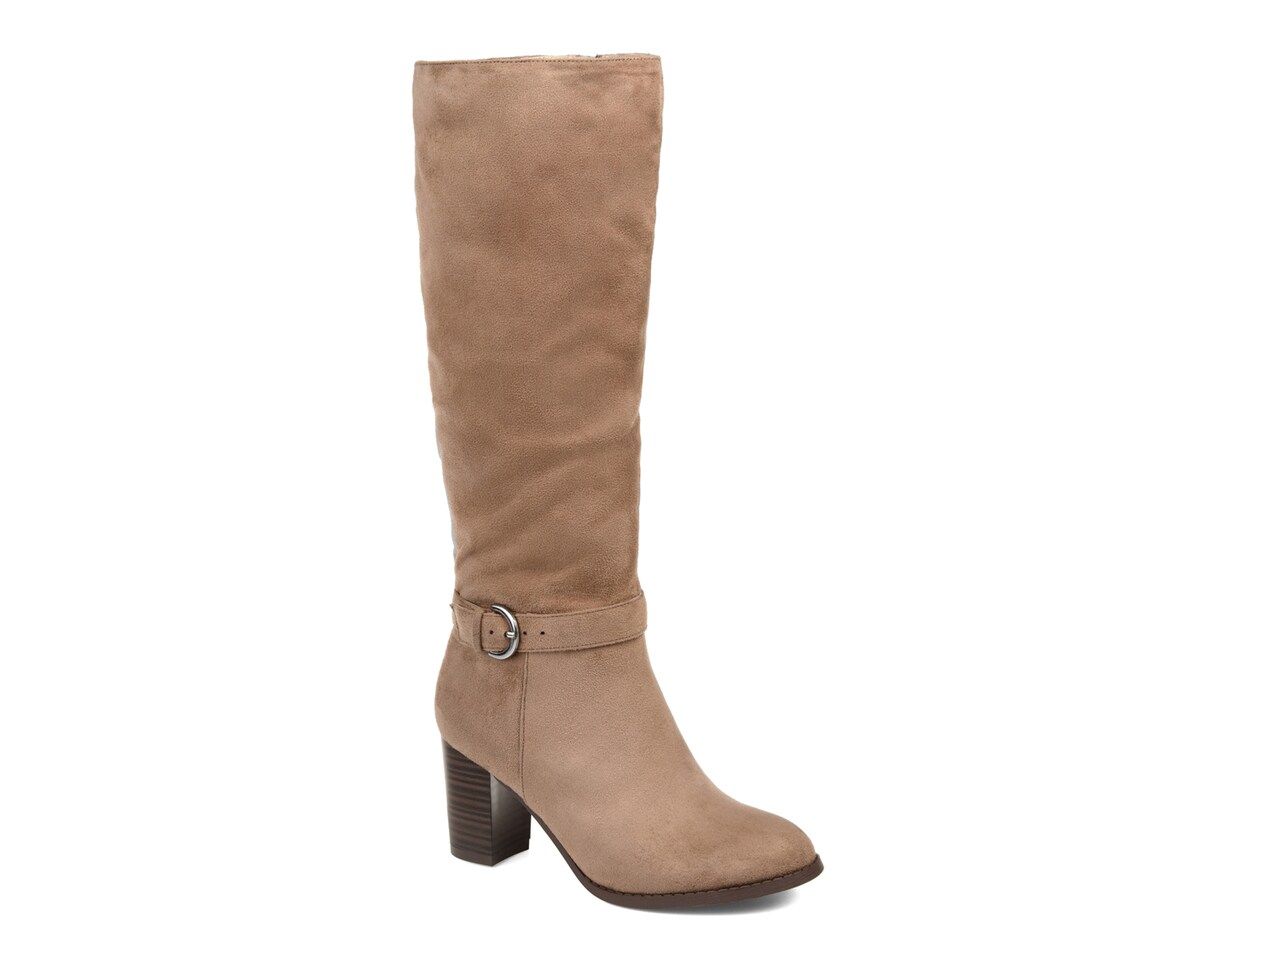 Journee Collection Joelle Extra Wide Calf Riding Boot | DSW